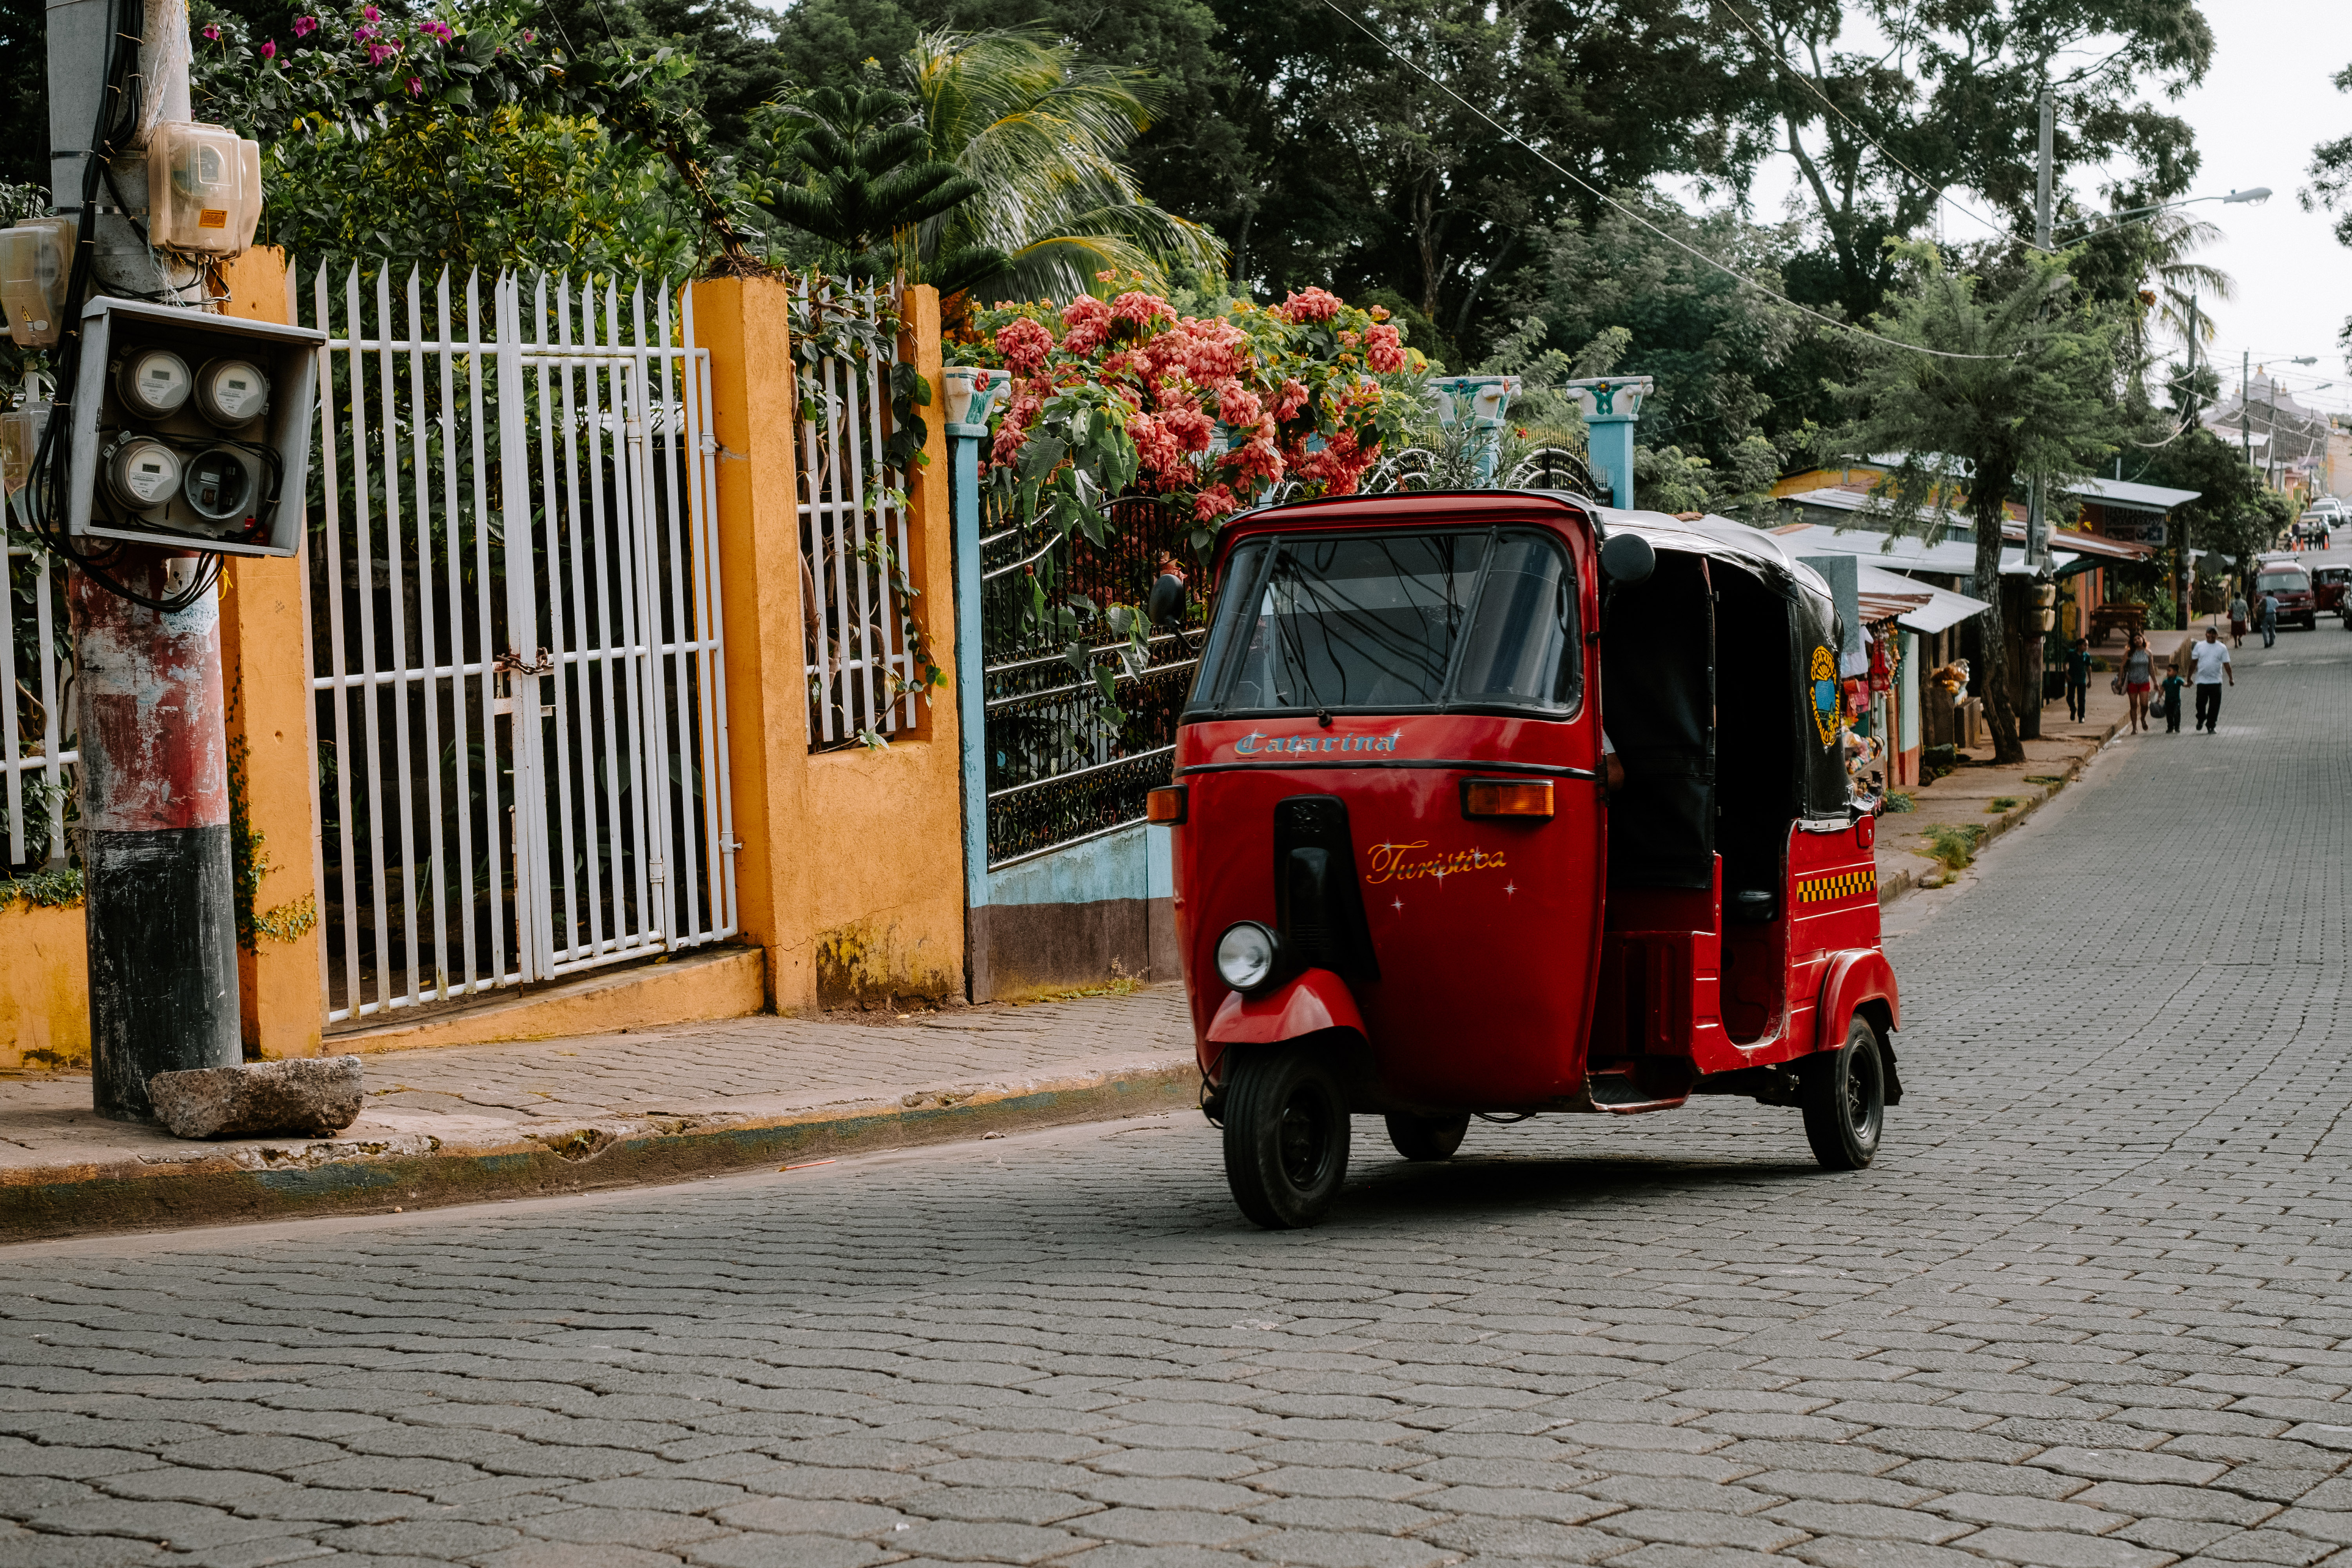 Taxi Ride on the Streets of Nicaragua